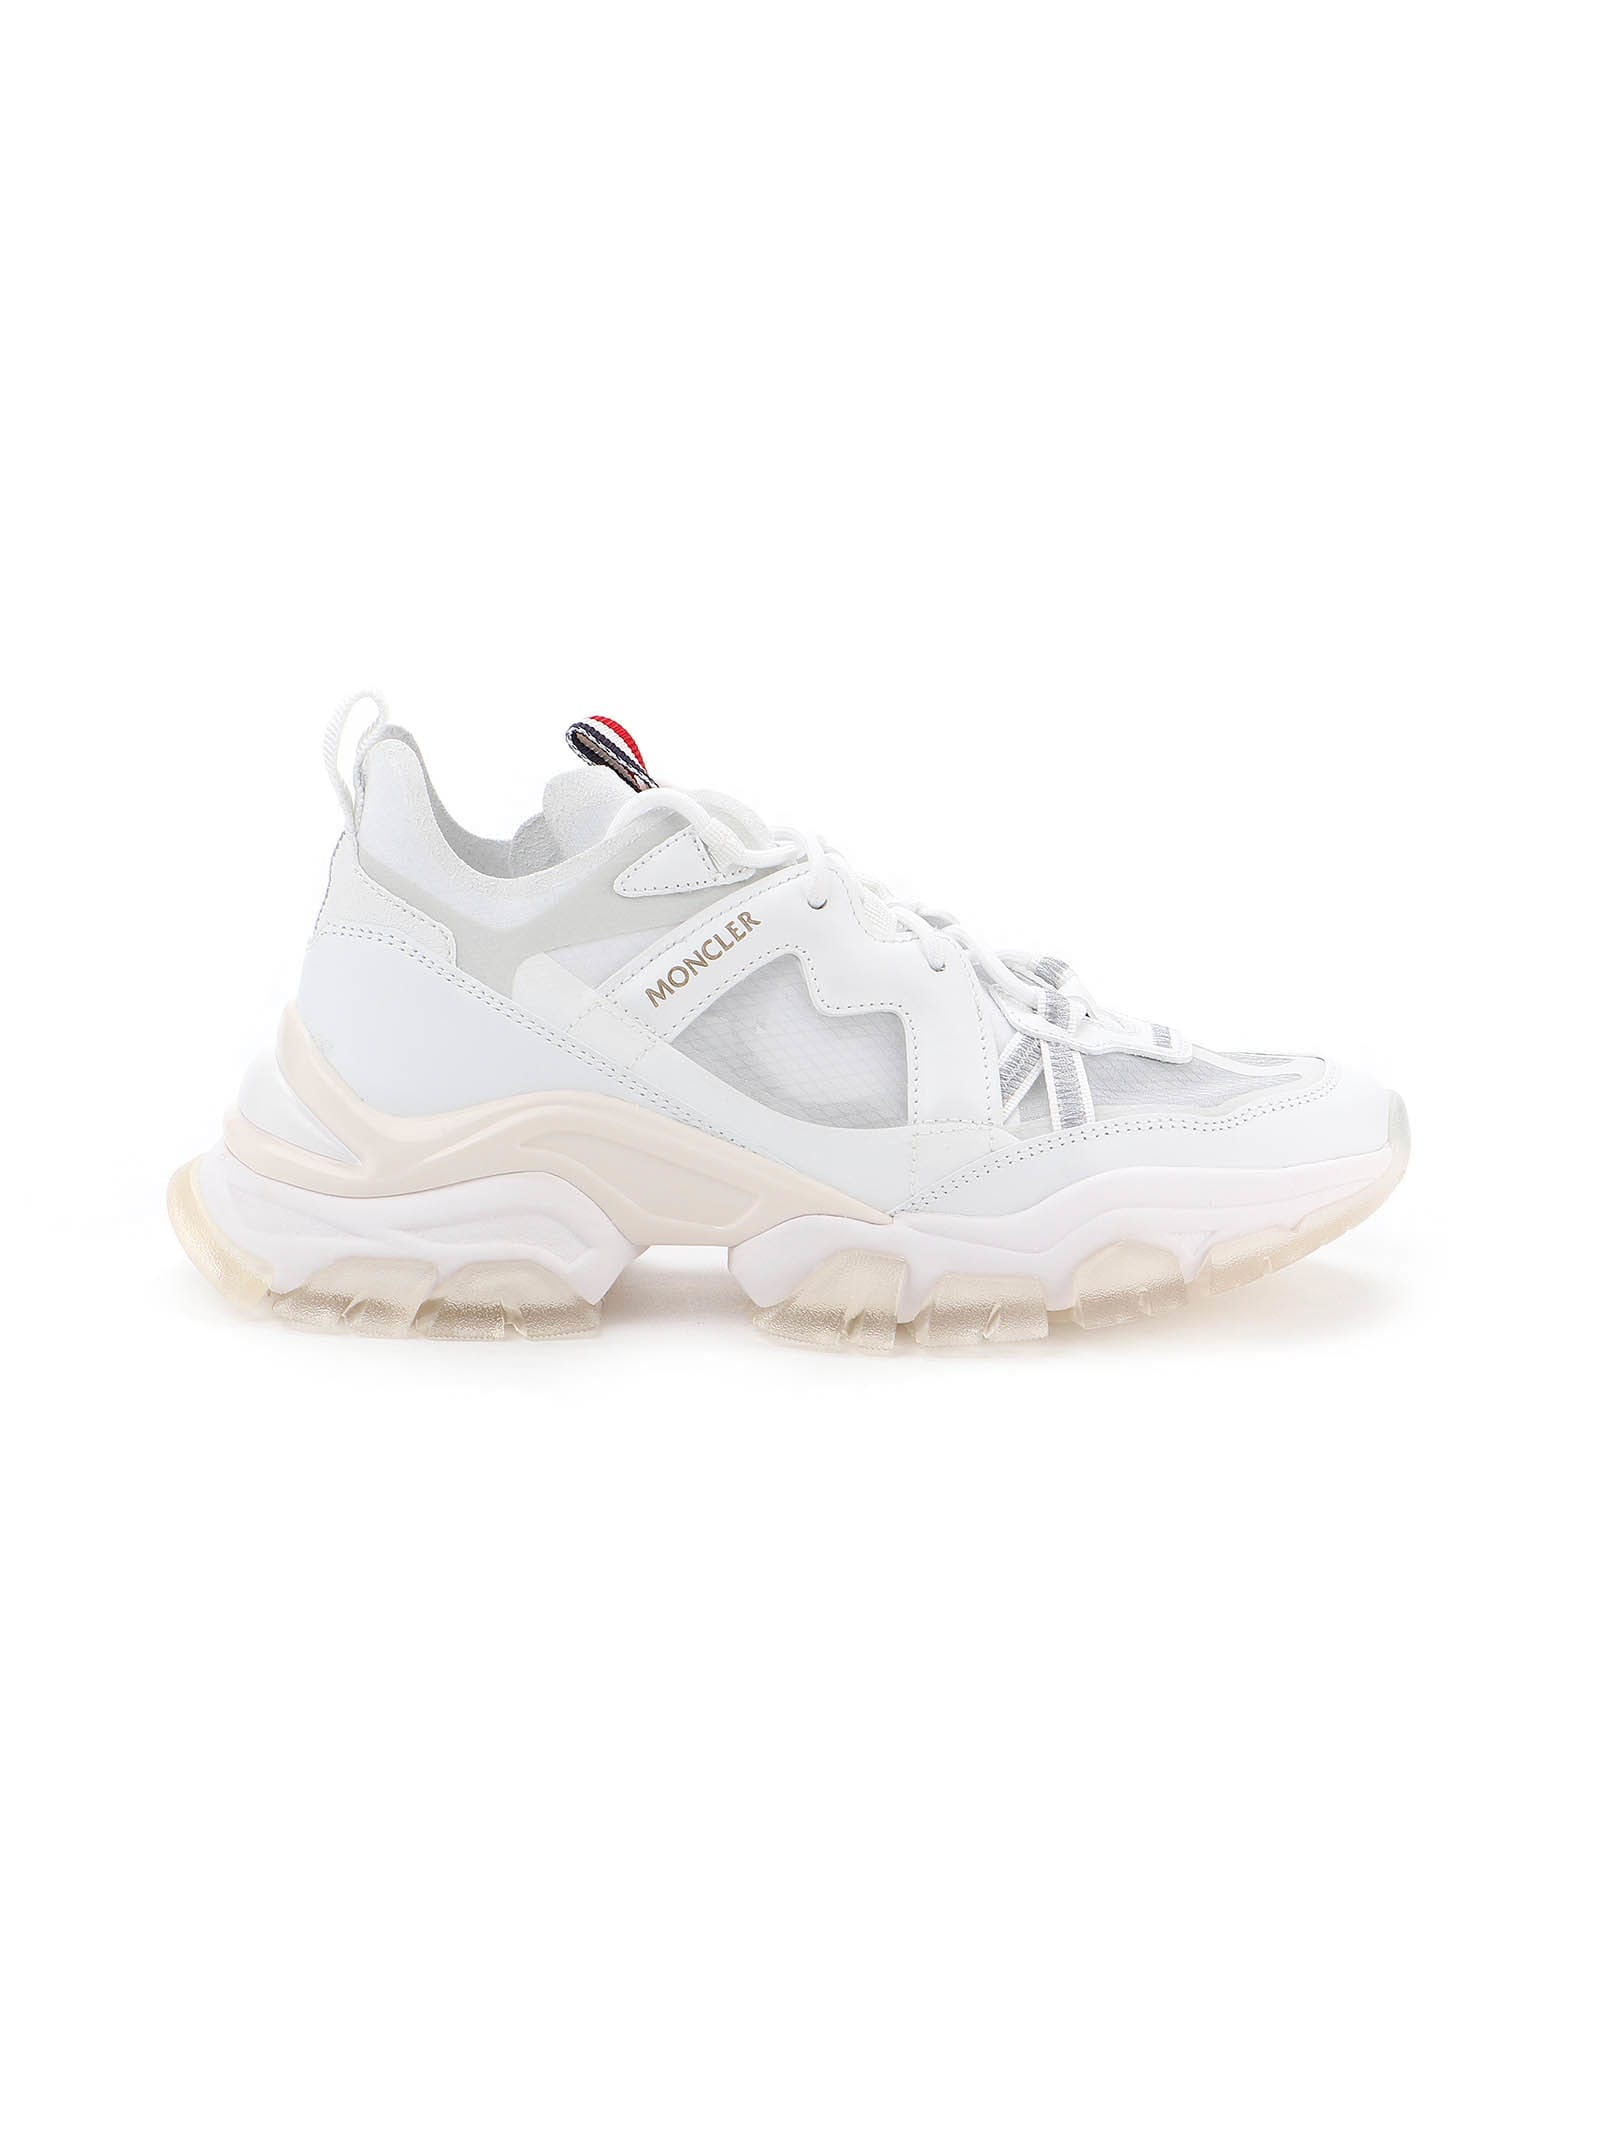 MONCLER LEAVE NO TRACE SNEAKER,11276971